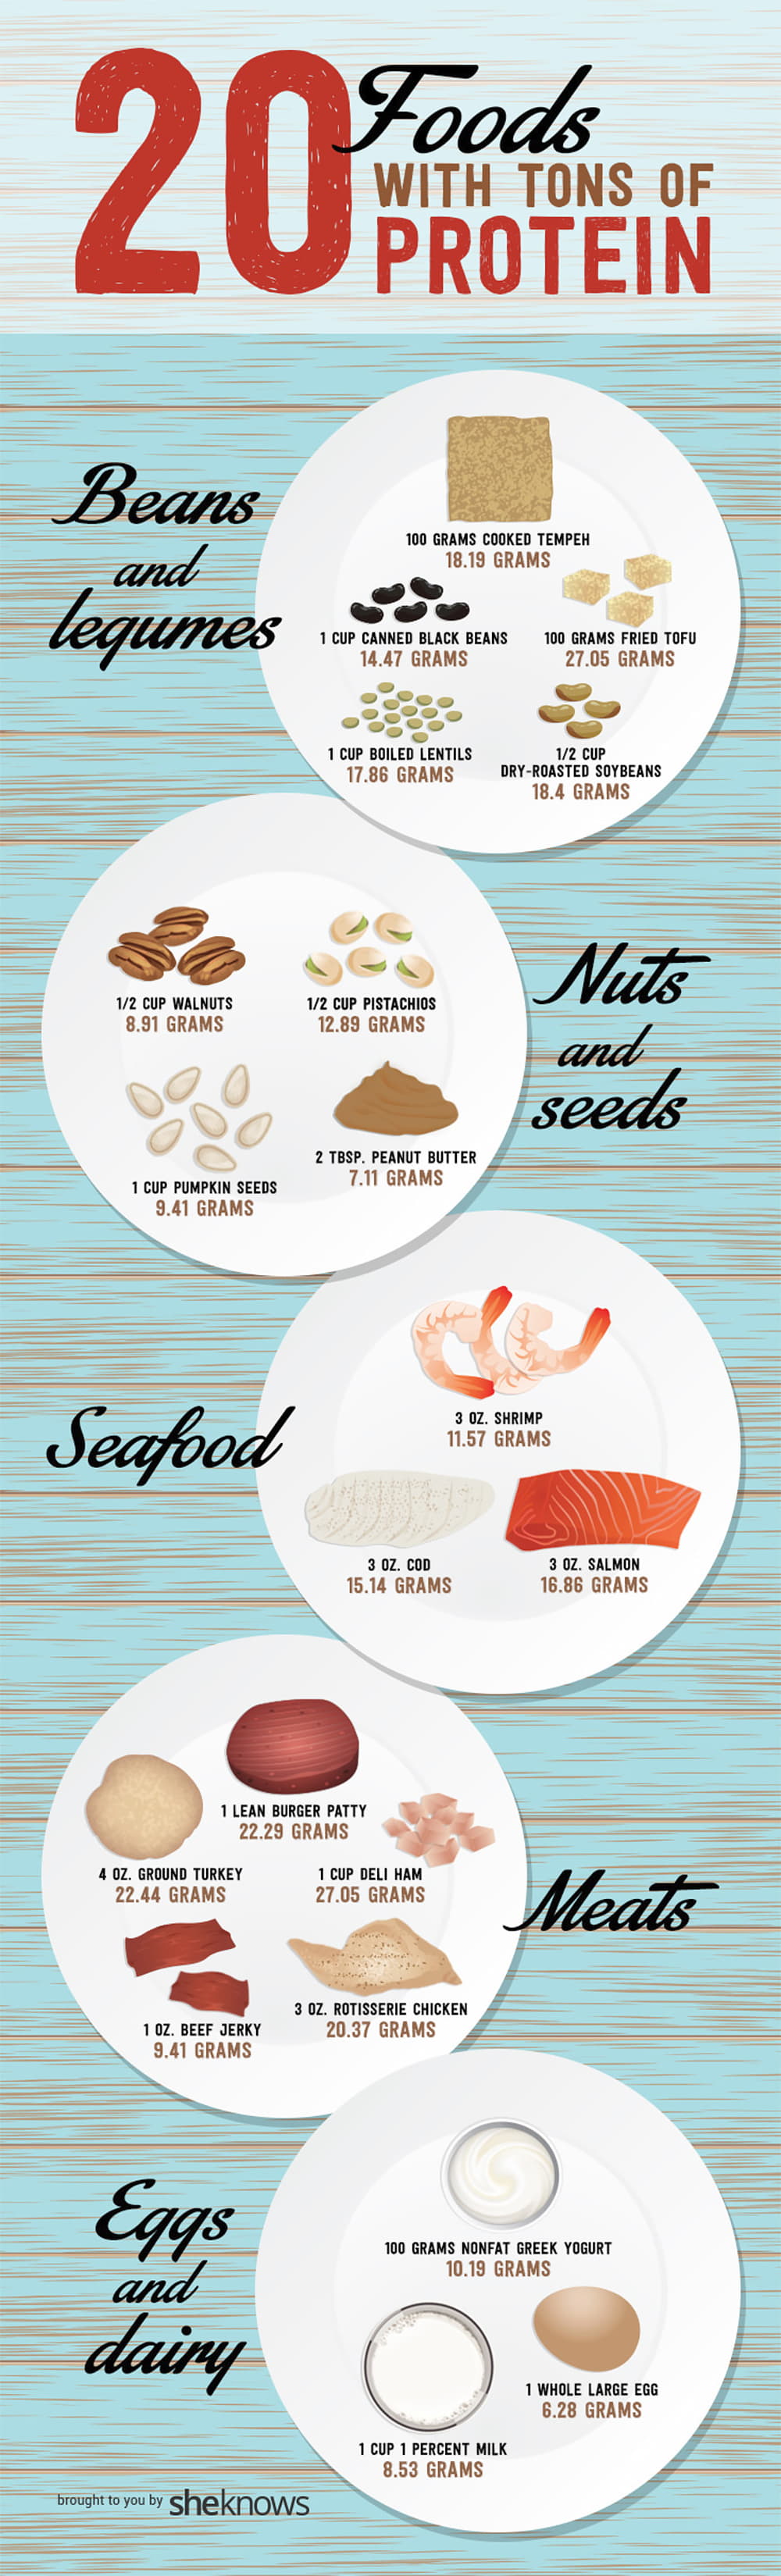 Protein Rich Foods Infographic